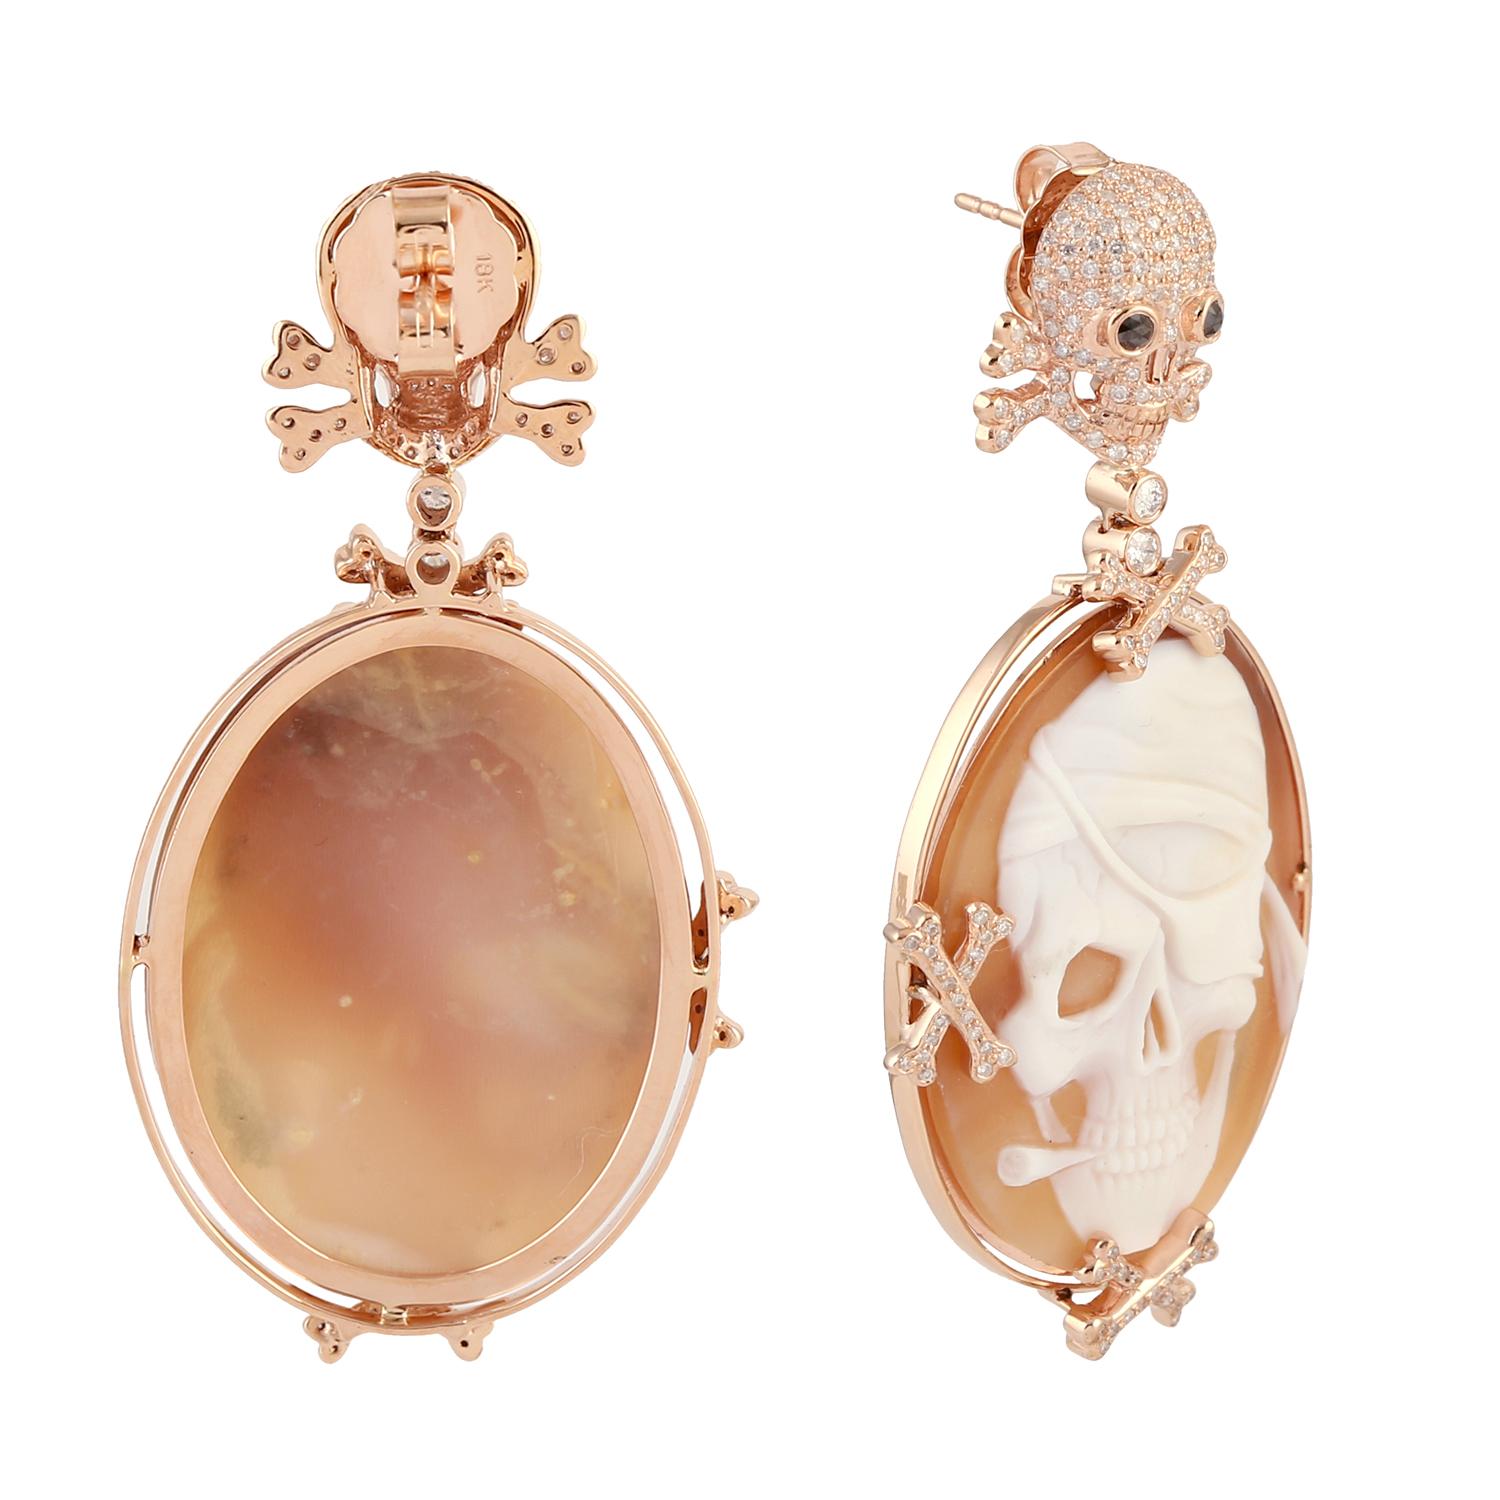 Contemporary Shell Cameo Pirate Skull Earrings With Pave Diamonds Skull Made In 18k Rose Gold For Sale